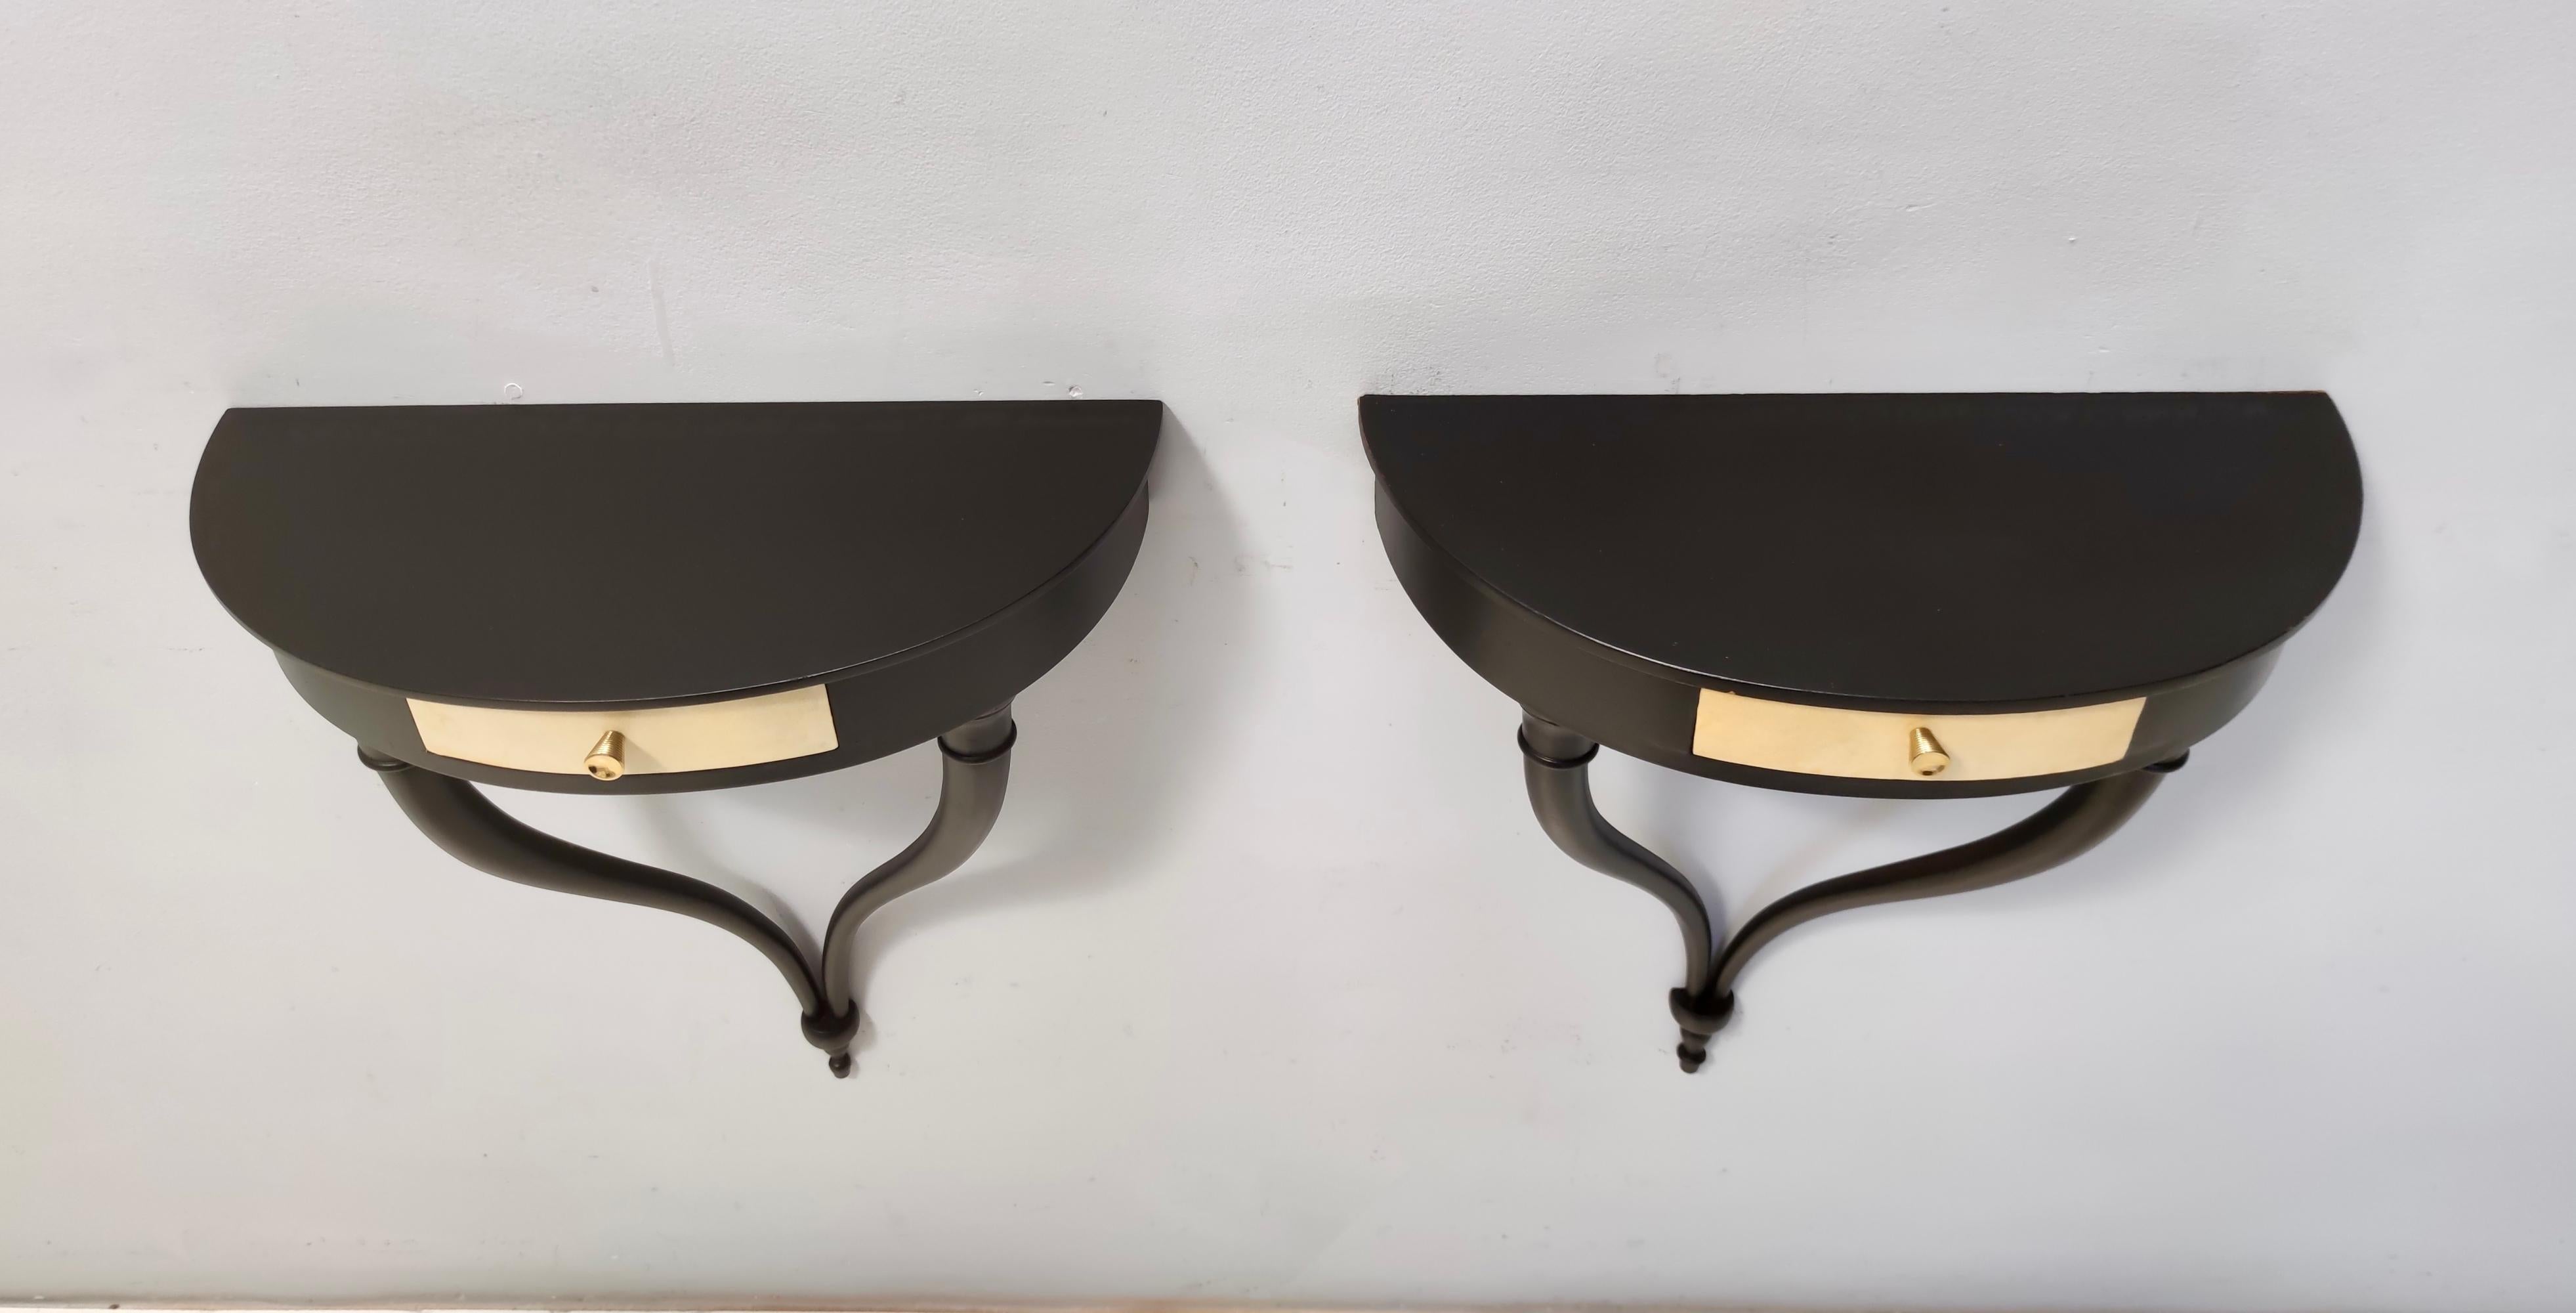 Pair of Wall-Mounted Console Tables / Nightstands by Guglielmo Ulrich, Italy 1